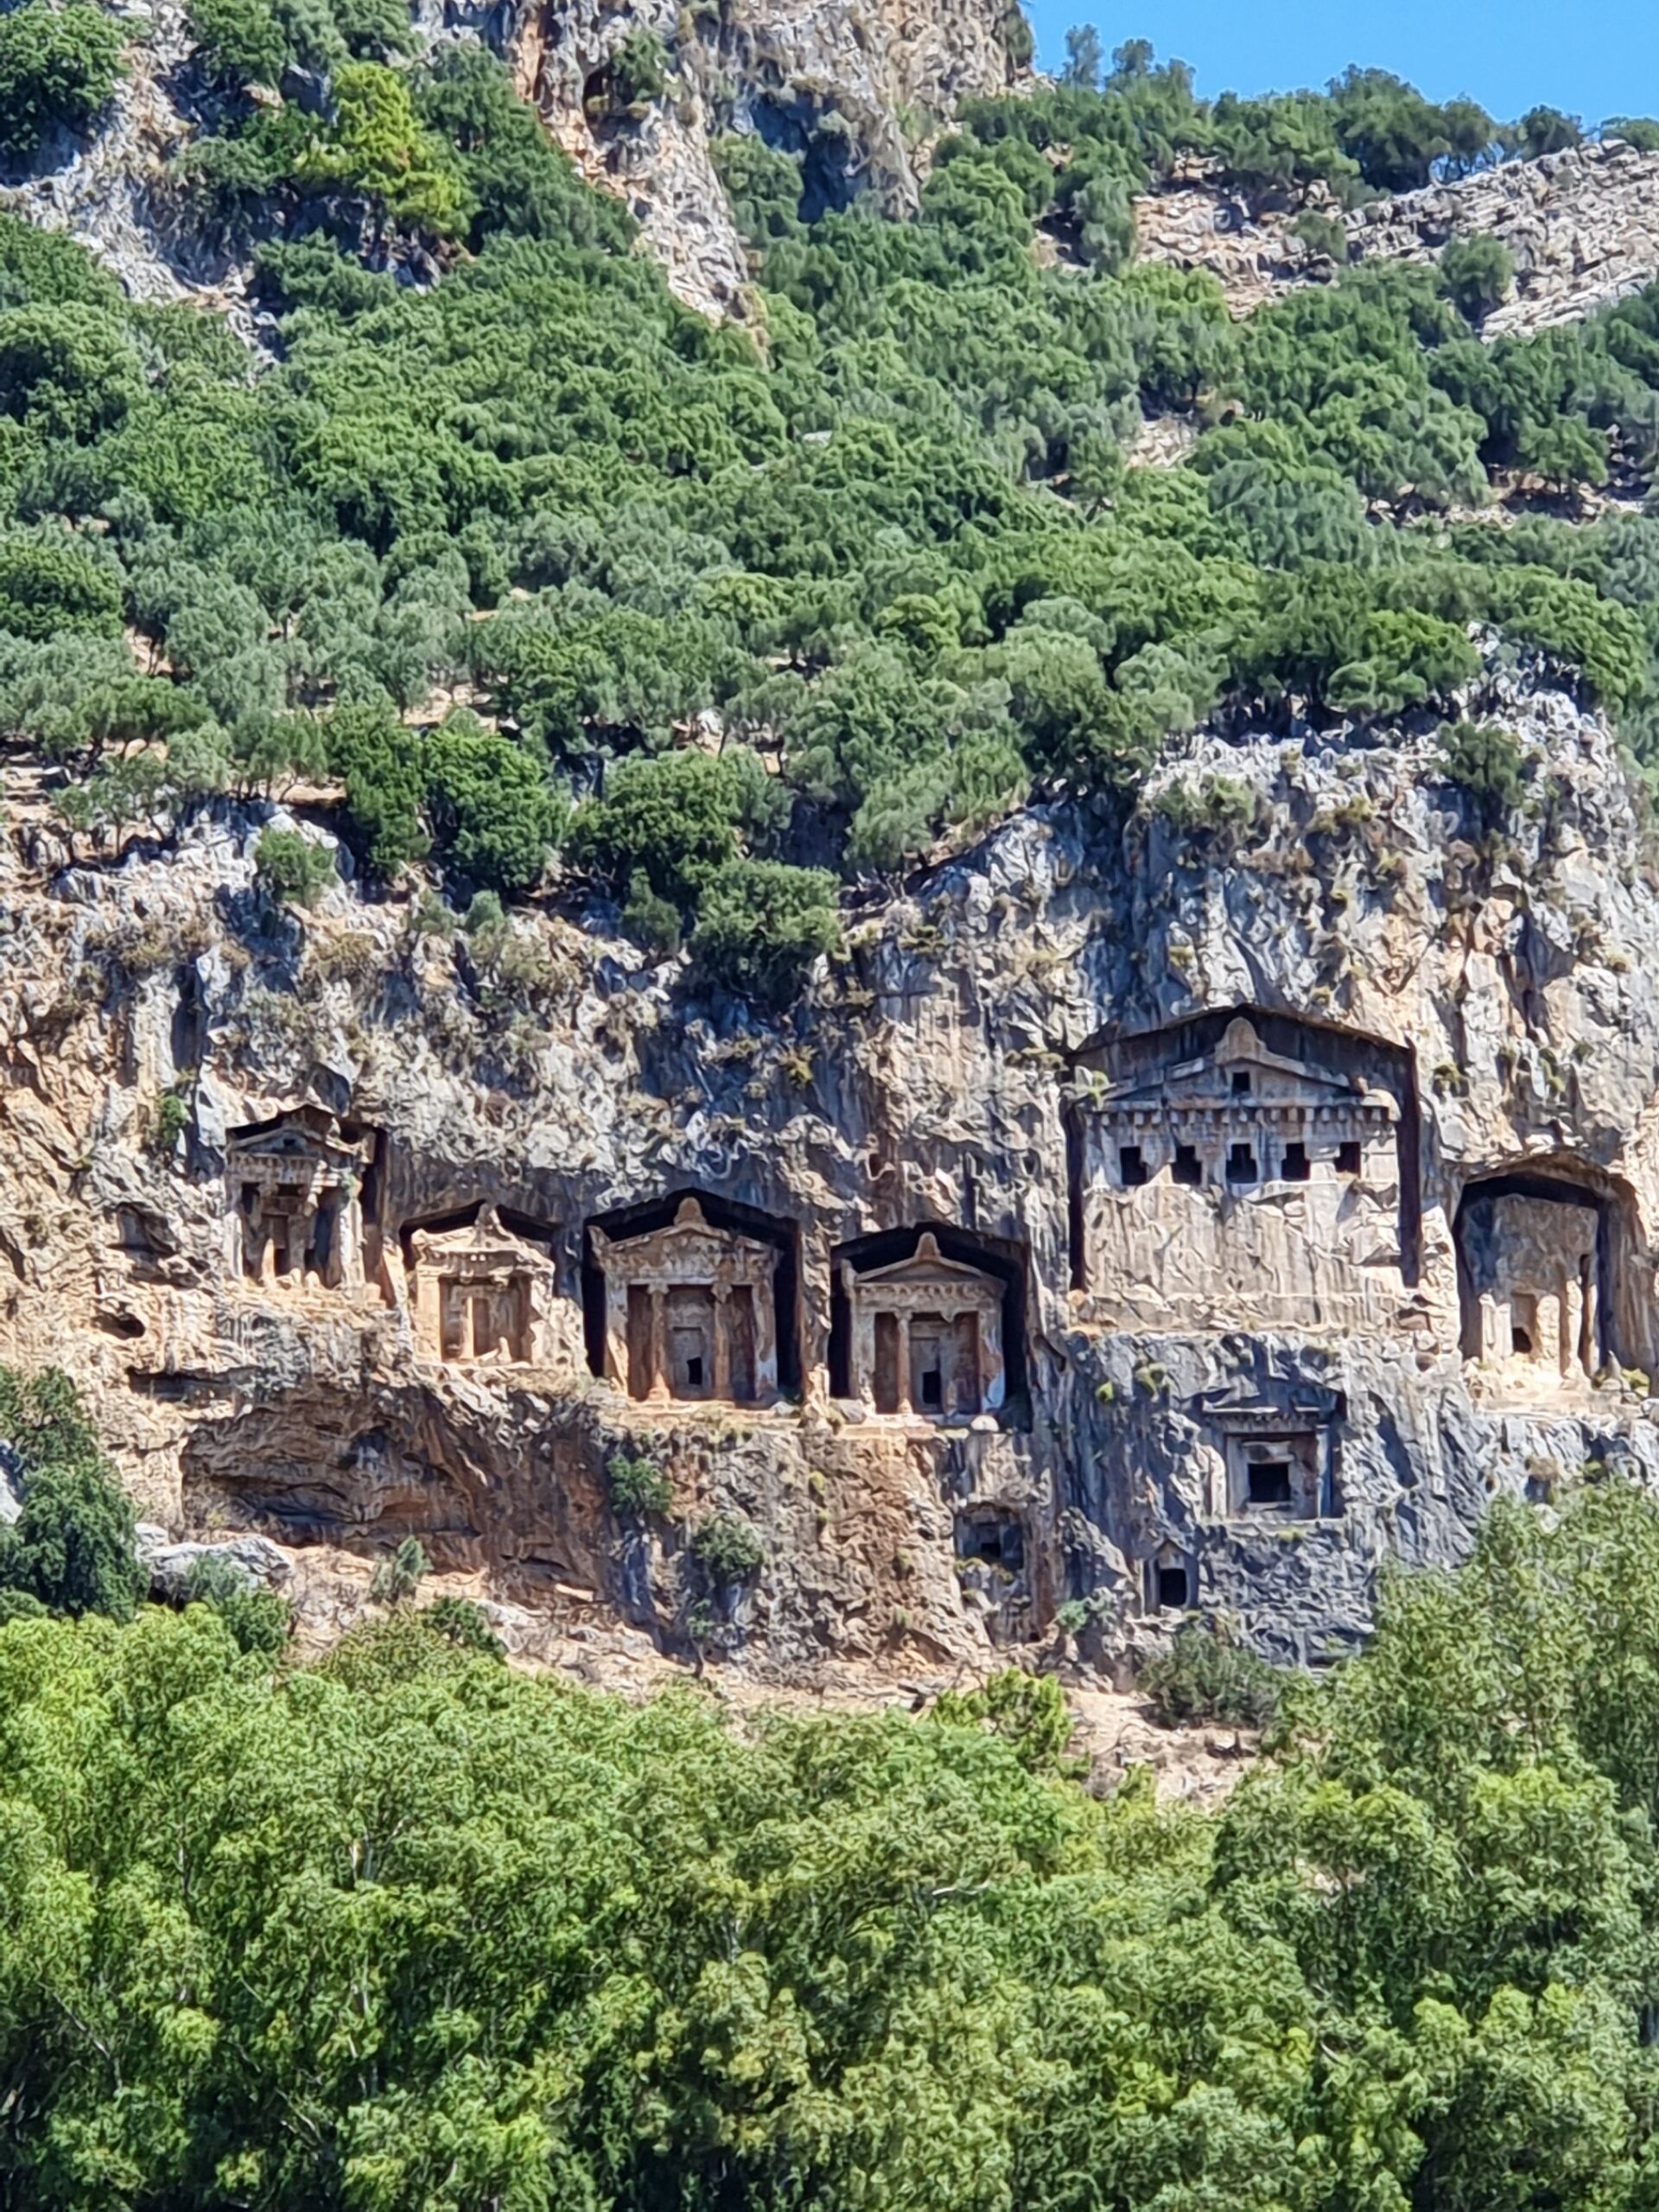 Lycian tombs carved into the rock